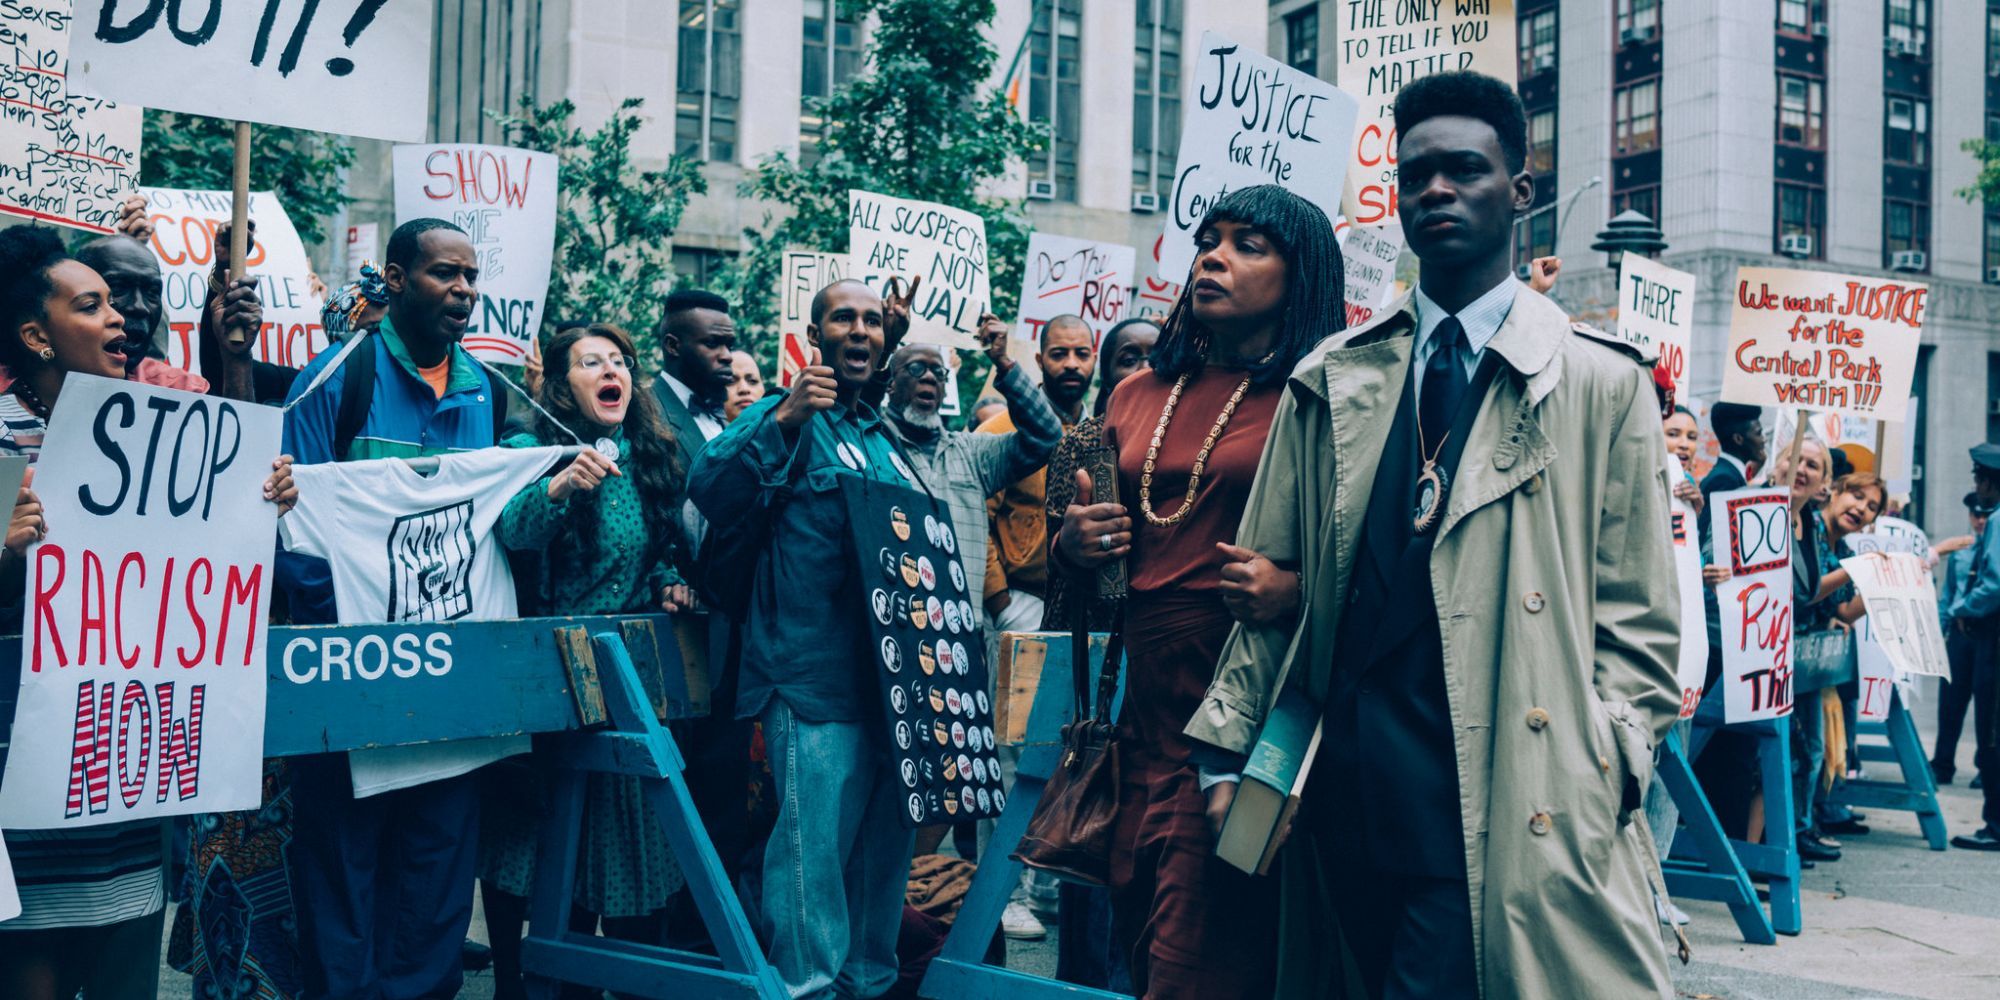 Yusef Salaam is led into court while anti-racism protesters support him. courtesy netflix